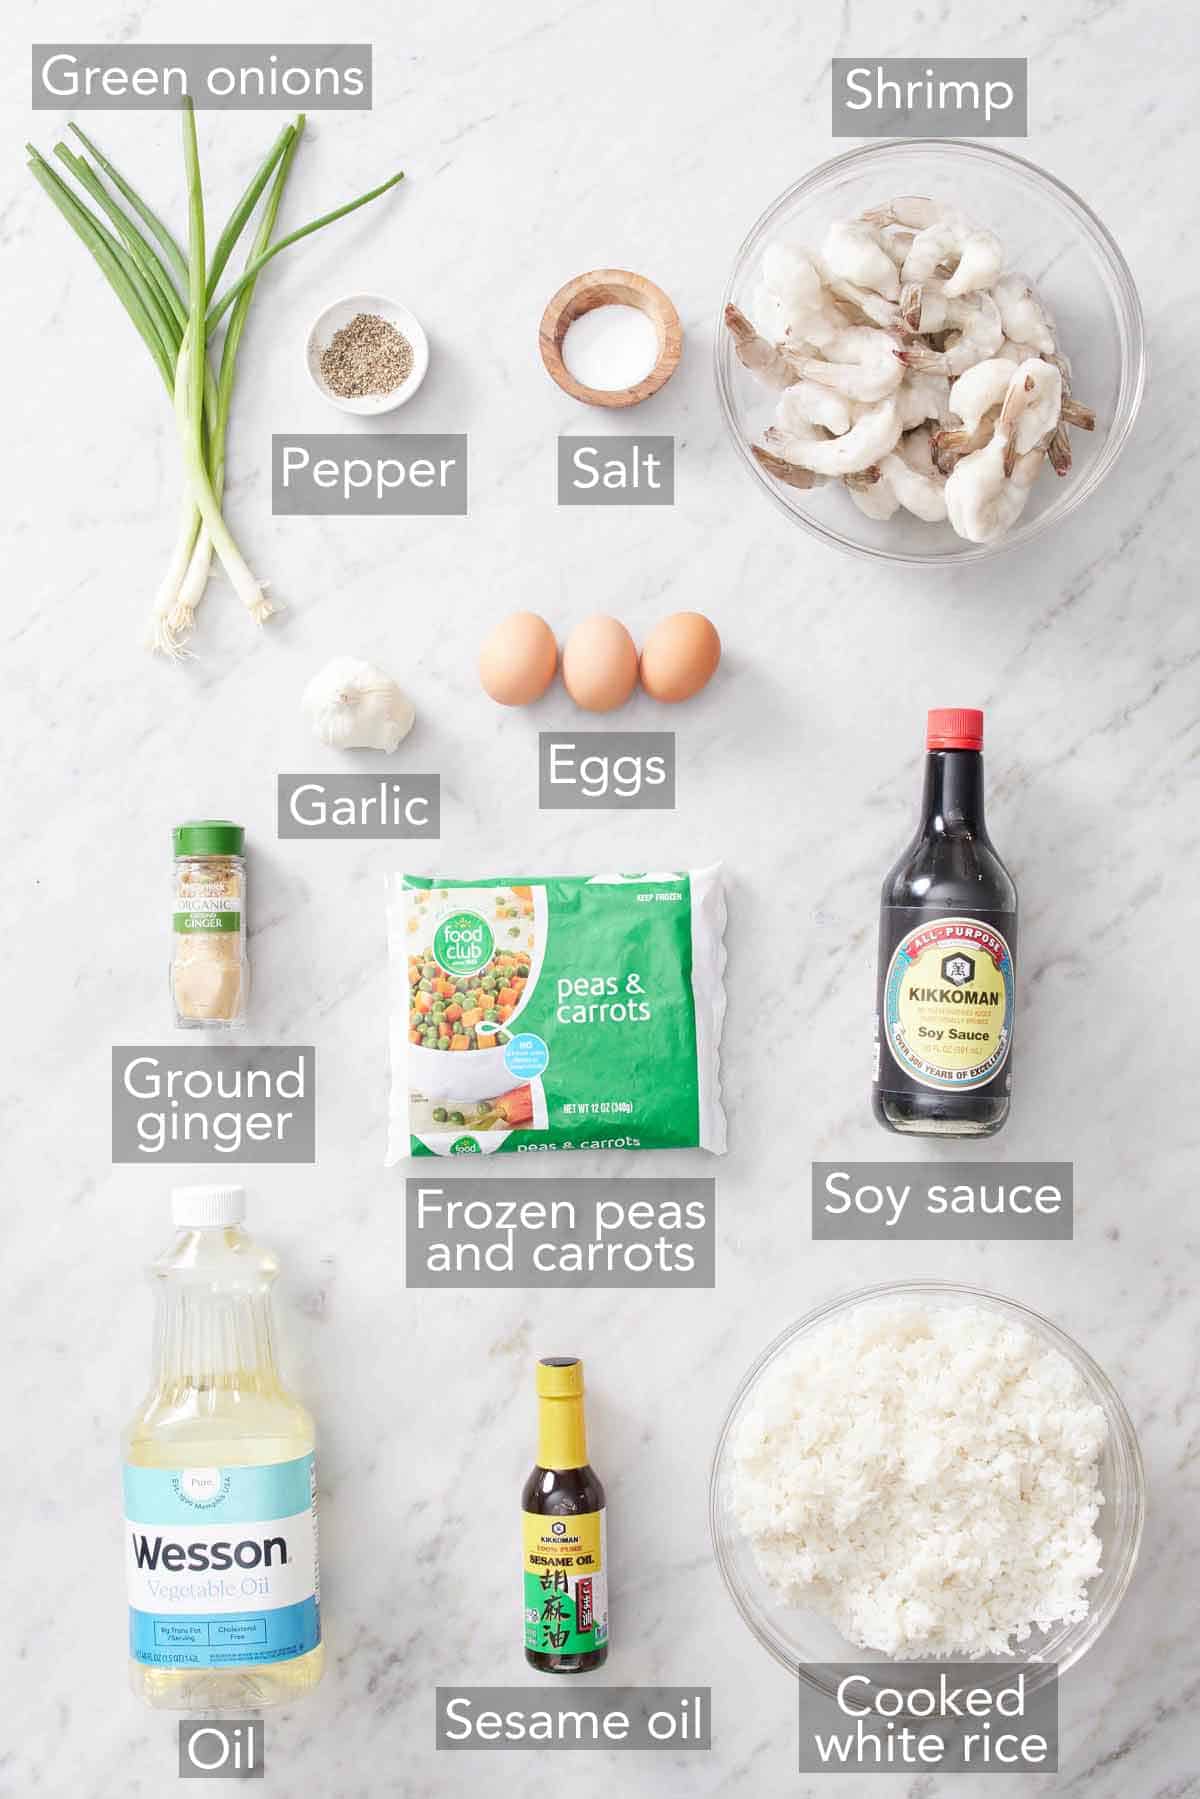 Ingredients needed for shrimp fried rice.